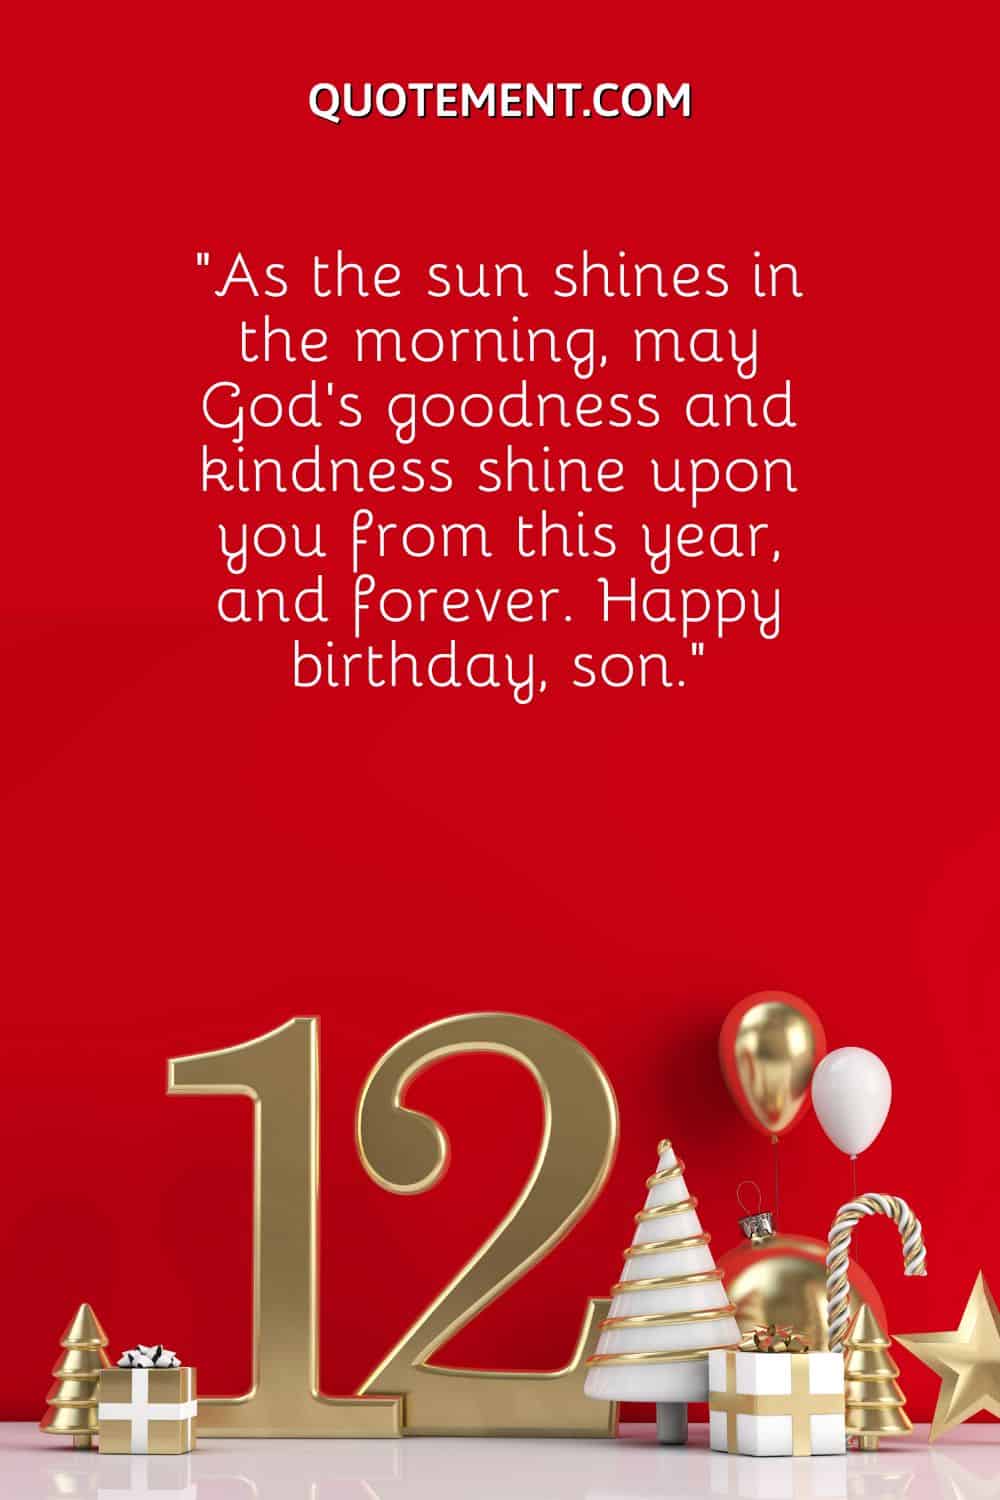 “As the sun shines in the morning, may God’s goodness and kindness shine upon you from this year, and forever. Happy birthday, son.”